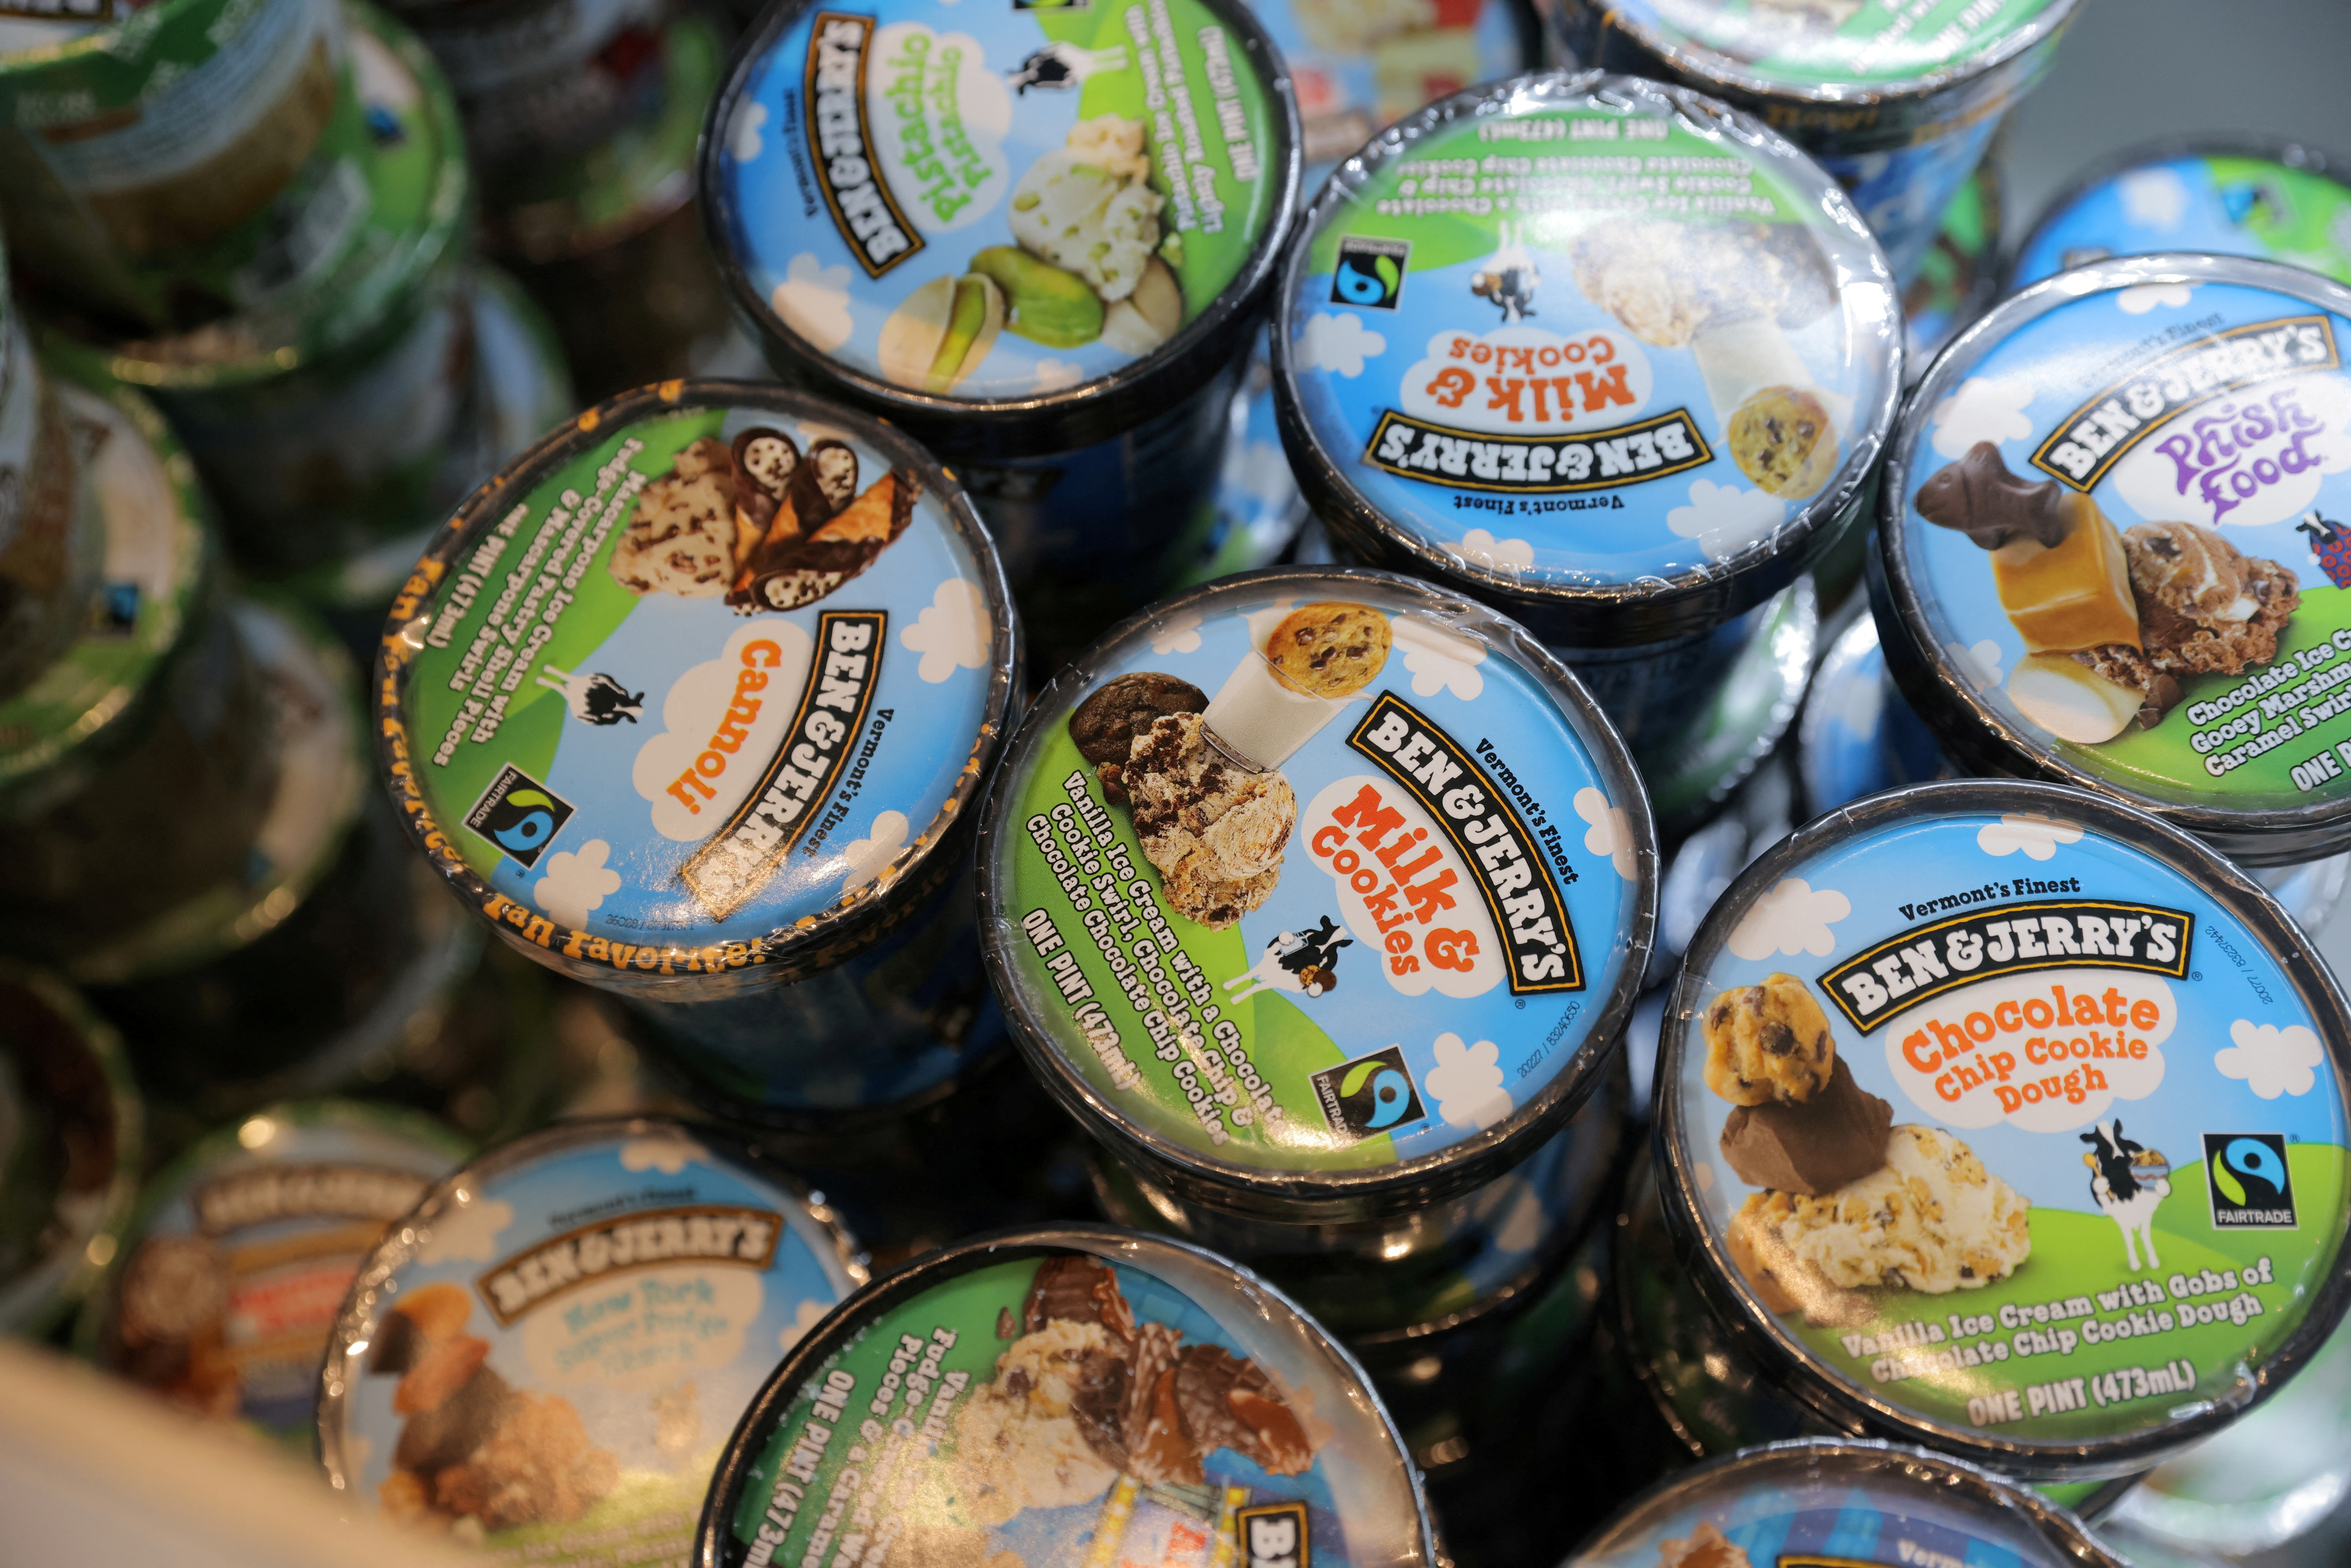 In search of value: Larger ice cream container sizes and other insights